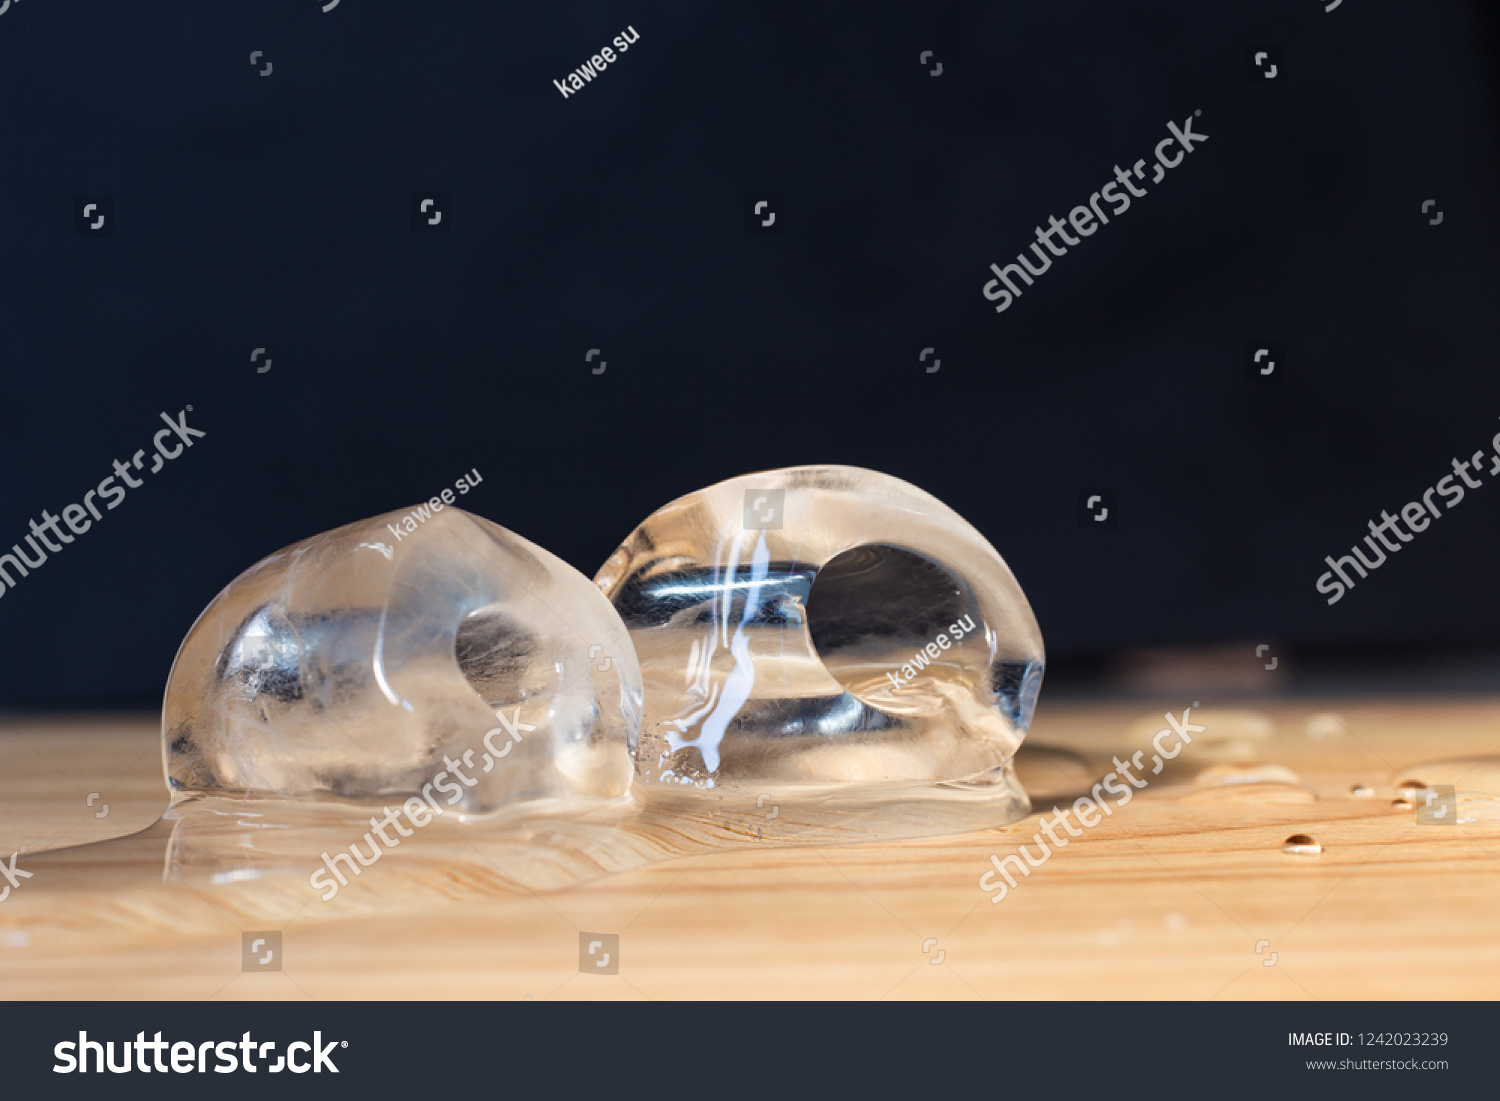 ice cubes-Ice cubes are melting;Ice cubes on wooden floor;Black background. #1242023239